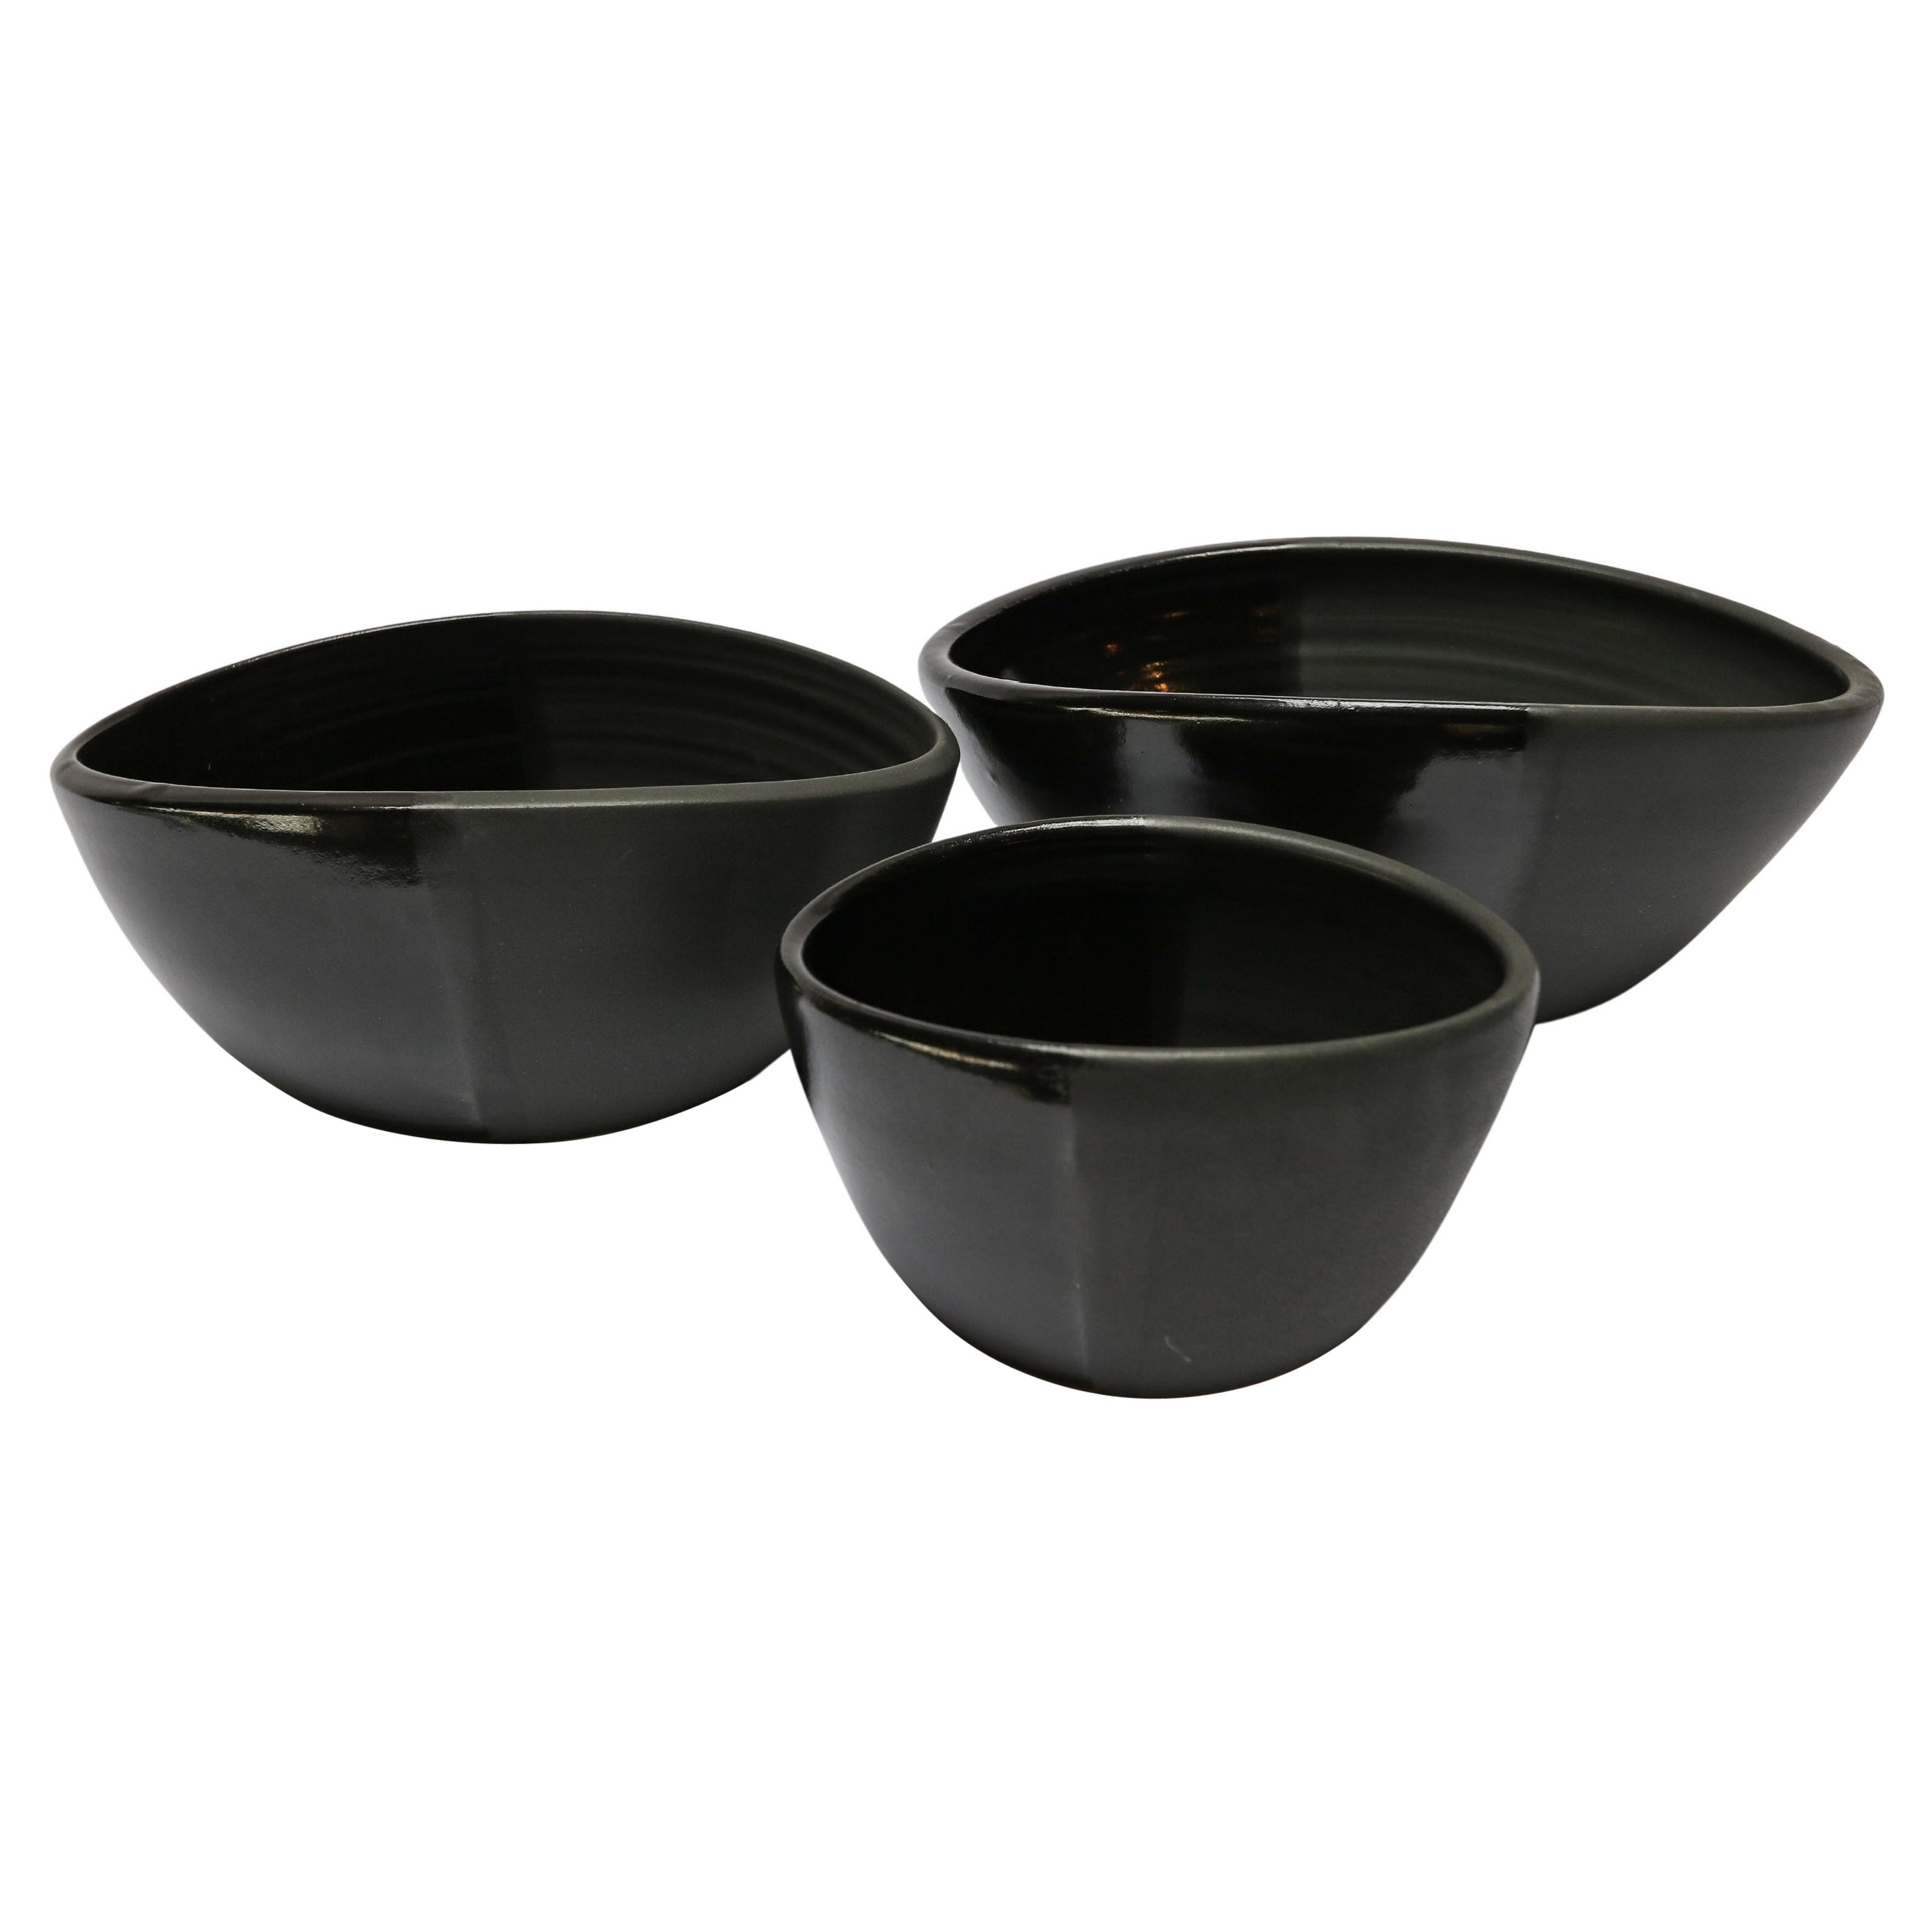 Derrick Nesting Bowls in Noir Black by Style Union Home